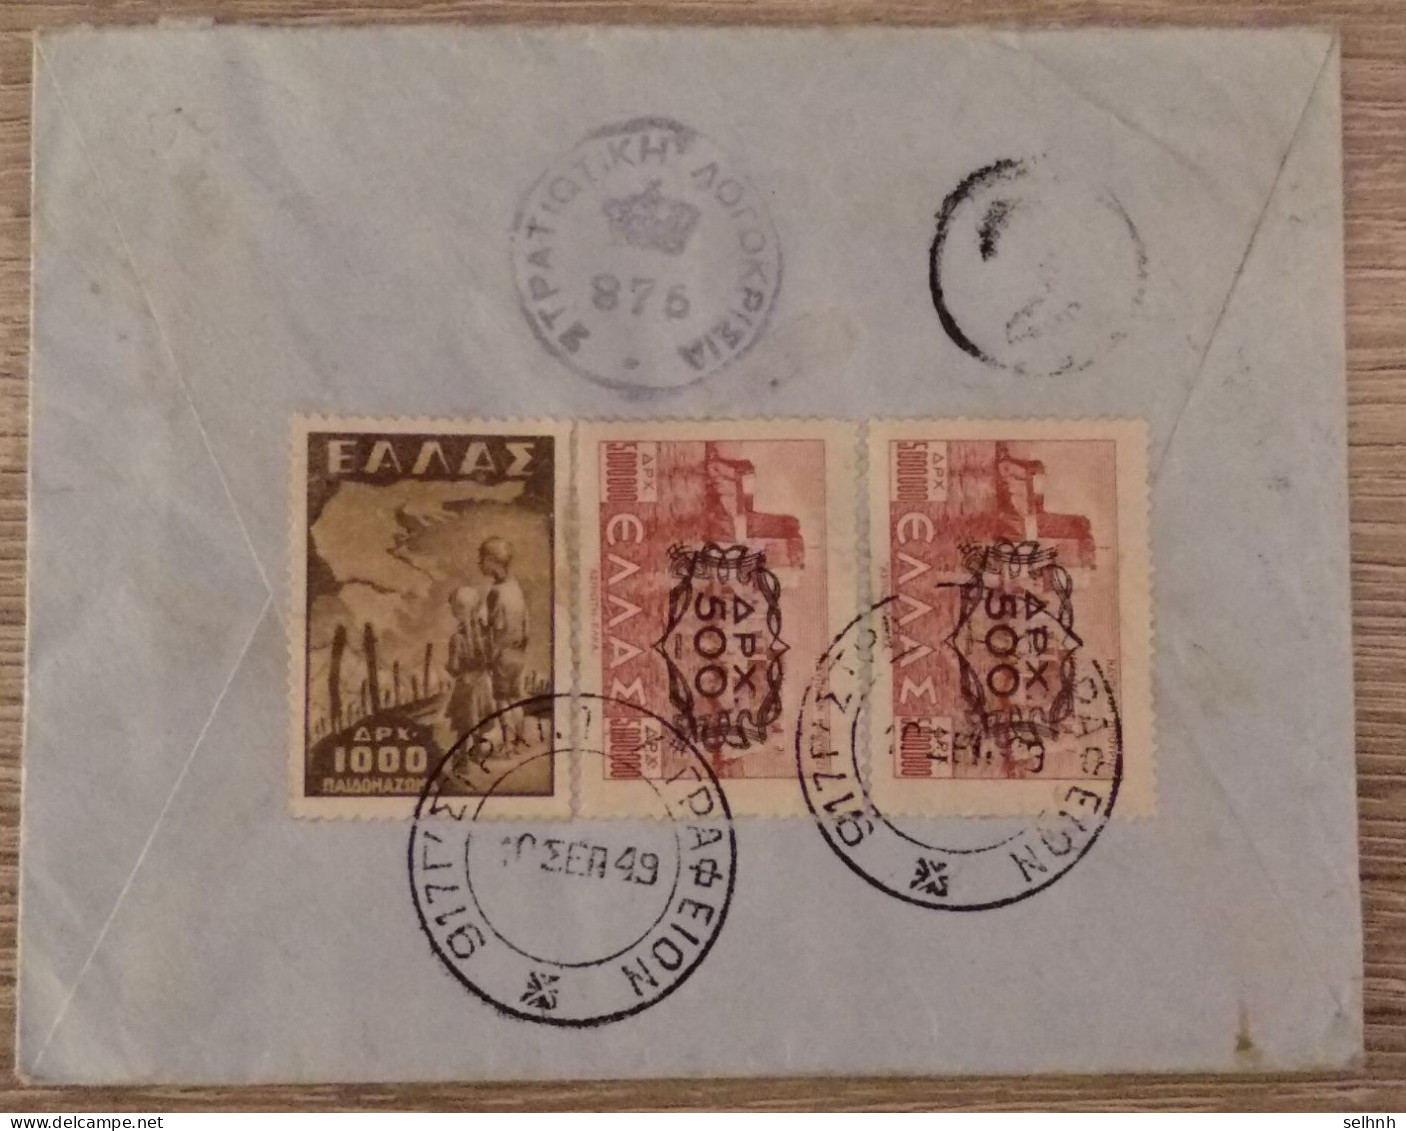 GREECE GRECE COVER TO FRANCE WITH ARMY GENSOR 876. THE STAMPS WERE CANCELED WITH "917 STRAT GRAFEION" - Covers & Documents